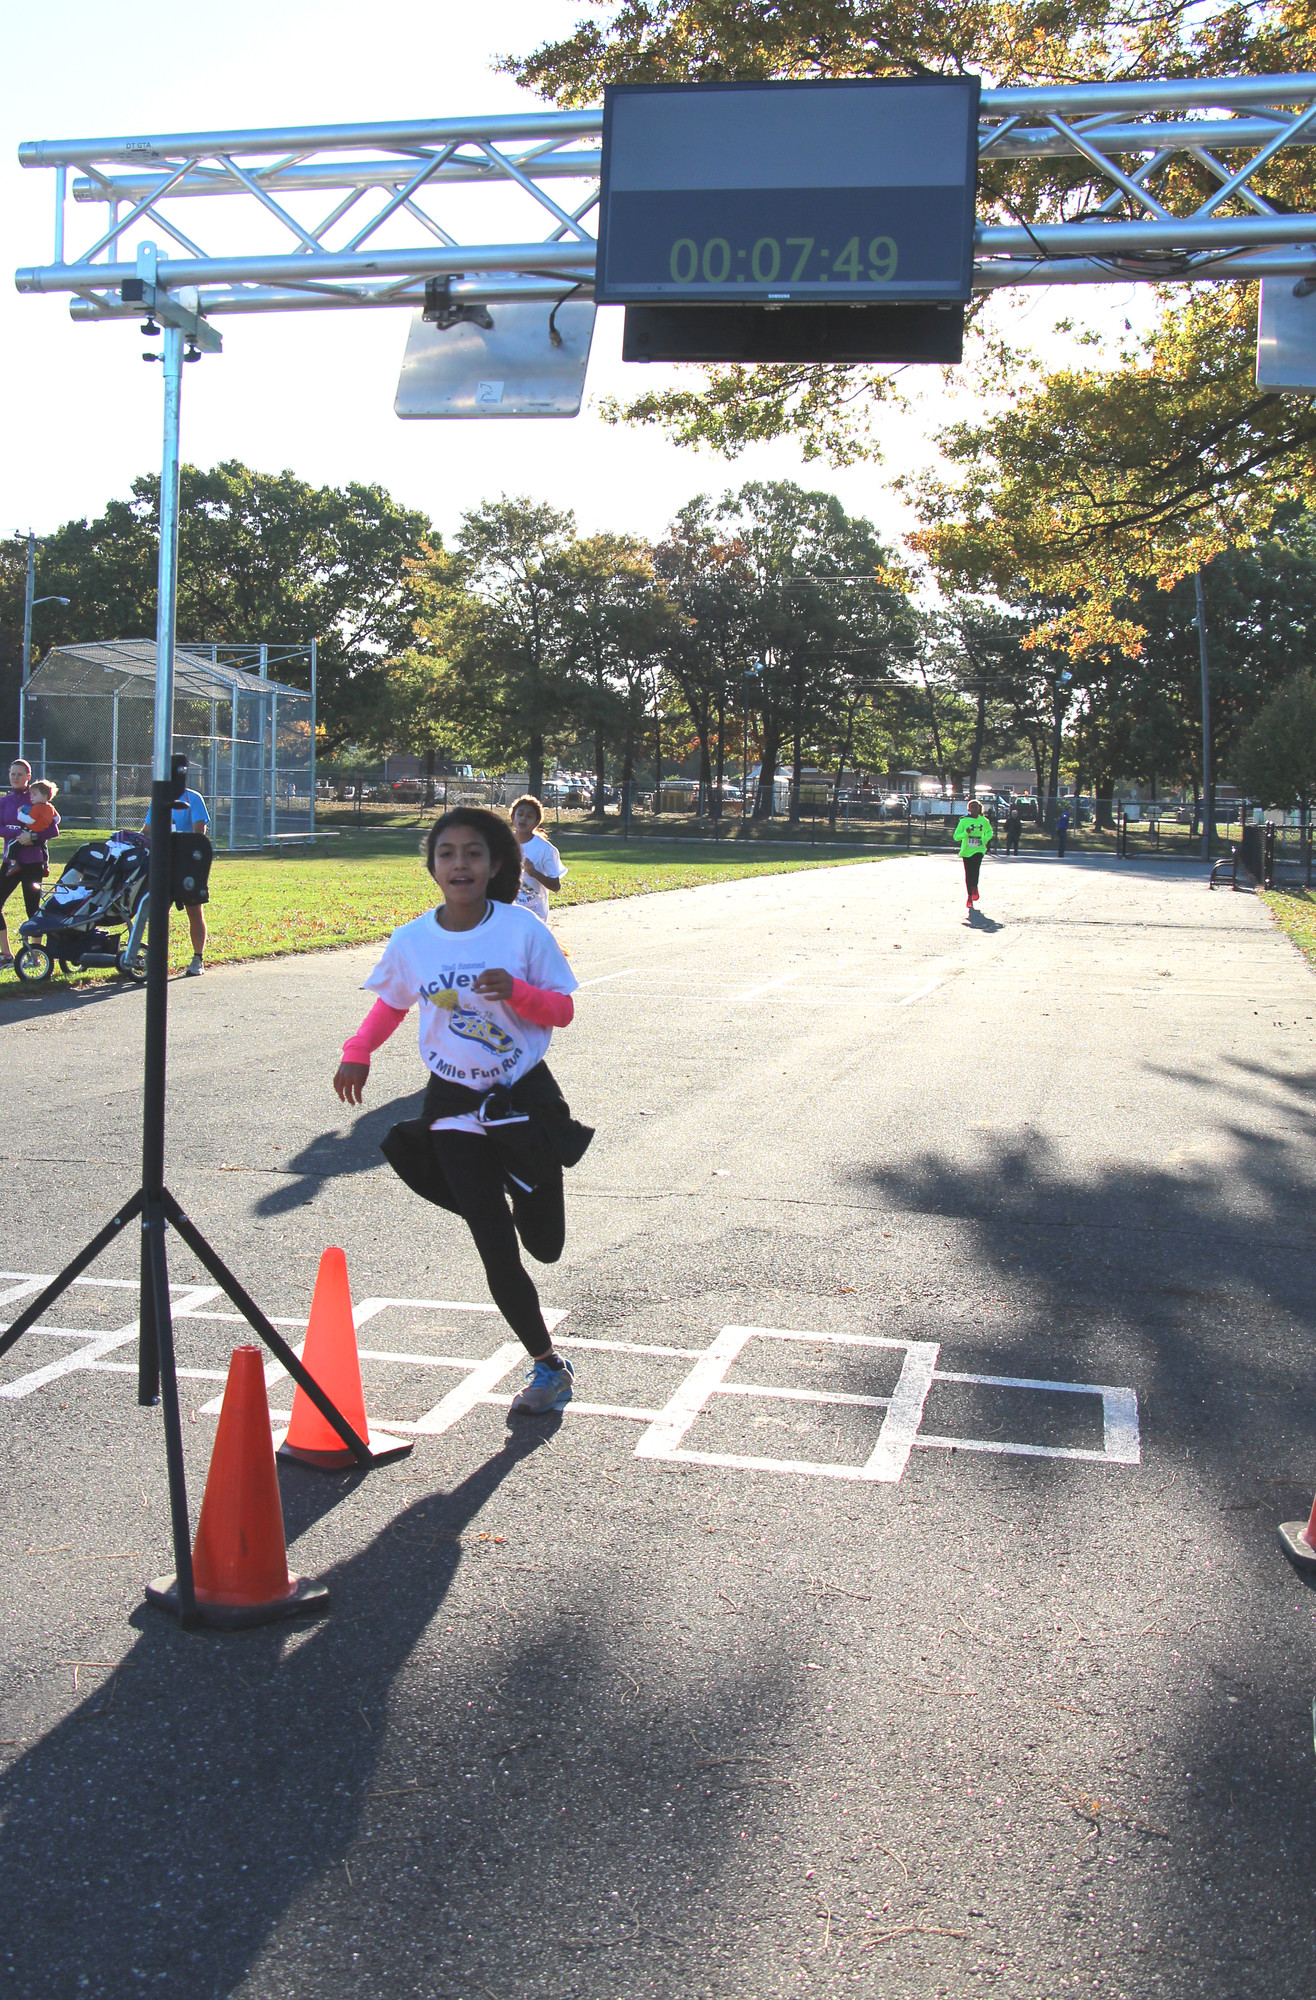 Scarlett Espinoza, 11, the 1-mile fun run winner, clocked in at 7 minutes and 49 seconds.